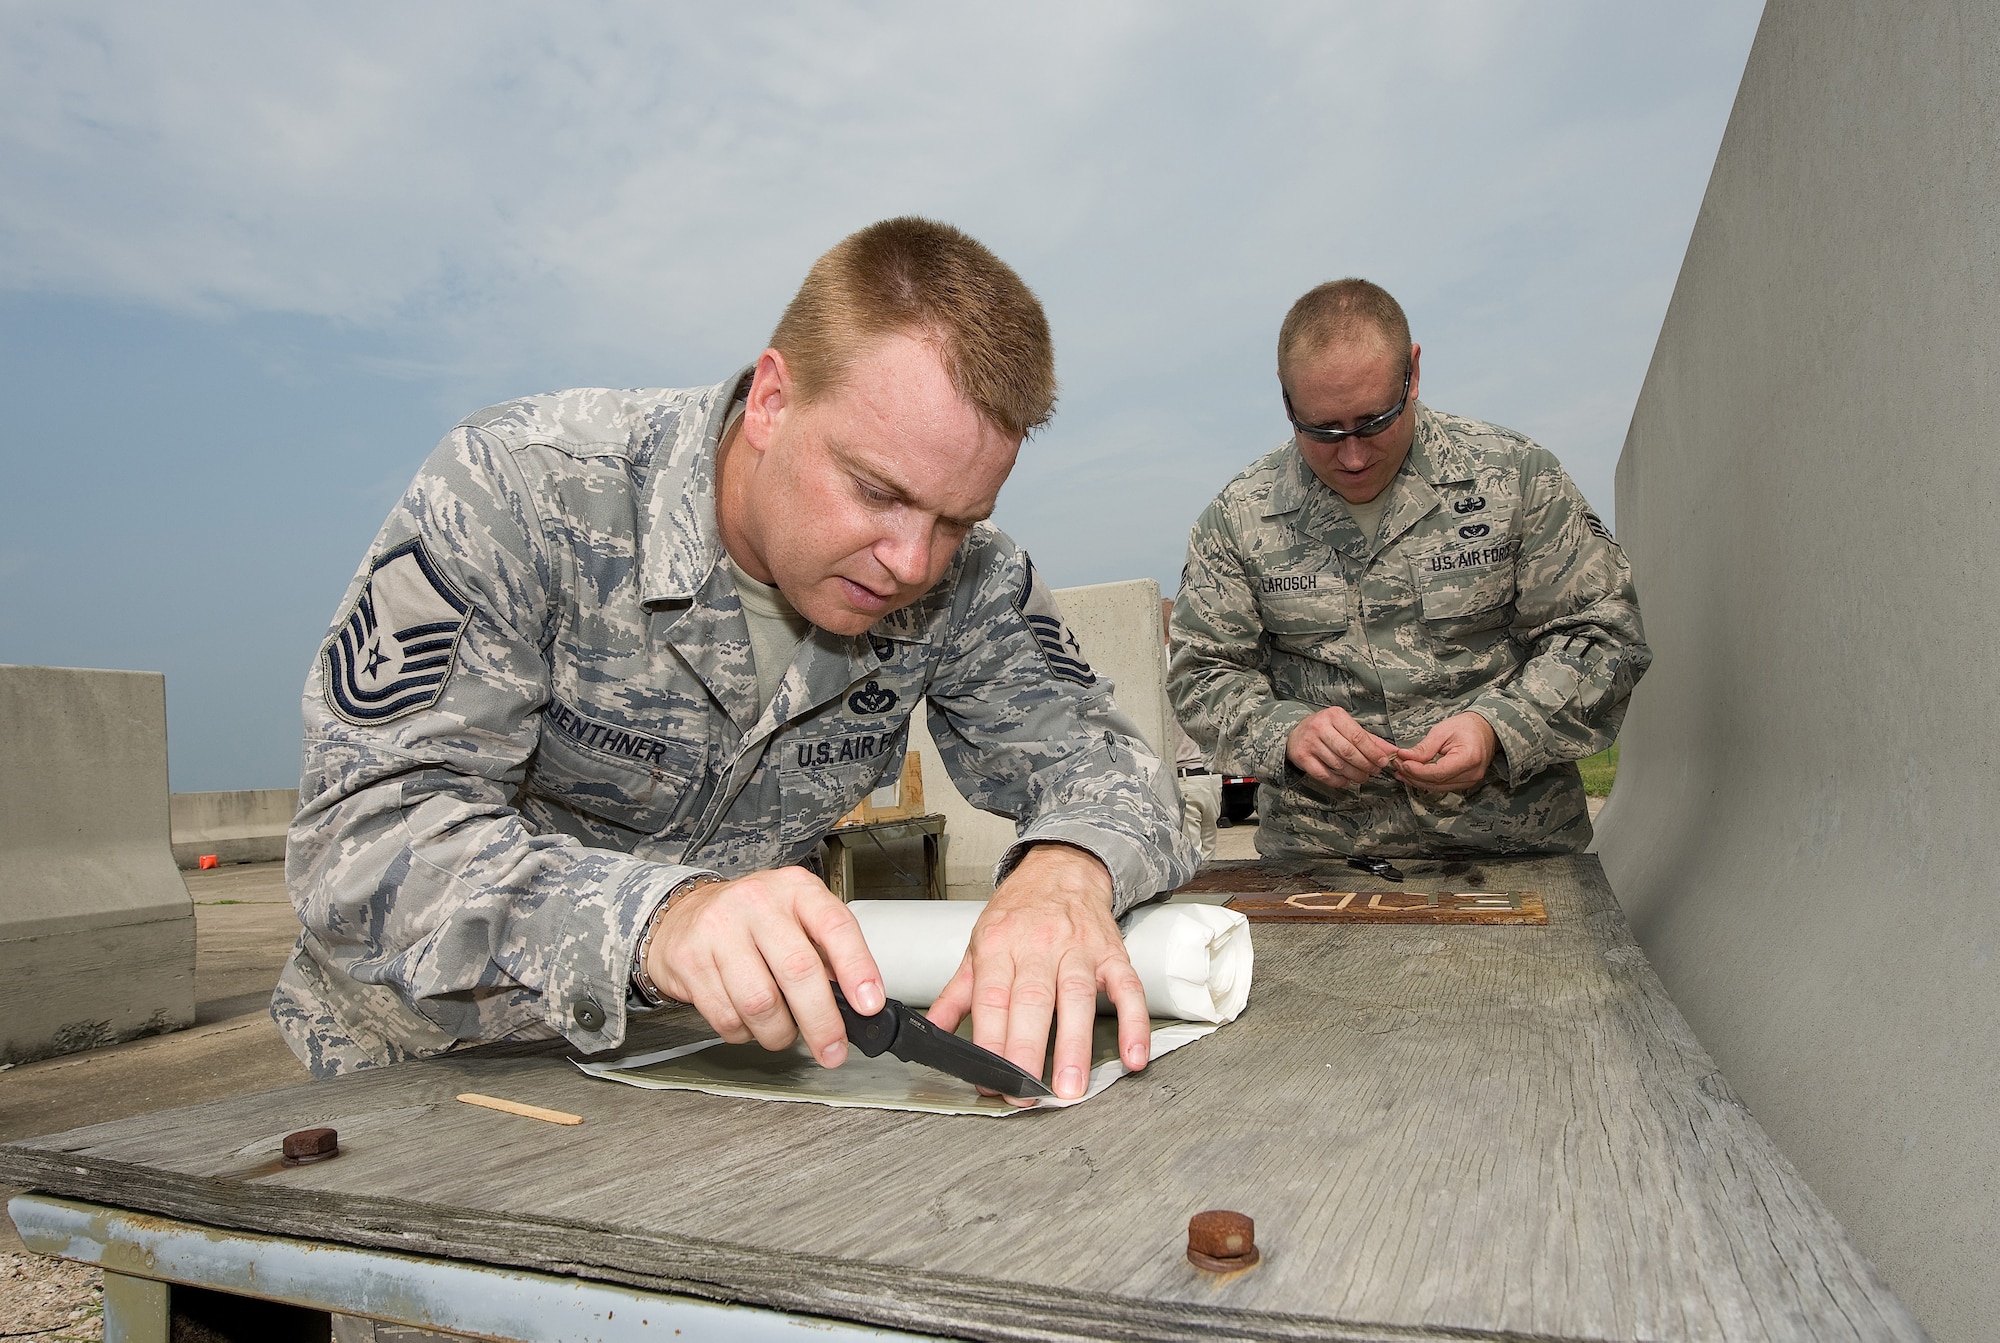 Master Sgt. David Guenthner, (left), 512th Civil Engineer Squadron Explosive Ordnance Disposal Flight program manager here, cuts out a piece of deta sheet, while Senior Airman John Larosch, a 512th EOD technician, places portions of deta sheet on to a steel plate at the EOD demolition range here, July 29. The technicians were testing a theory to see how much deta sheet it took to penetrate steel after detonation. (U.S. Air Force photo/Jason Minto) 